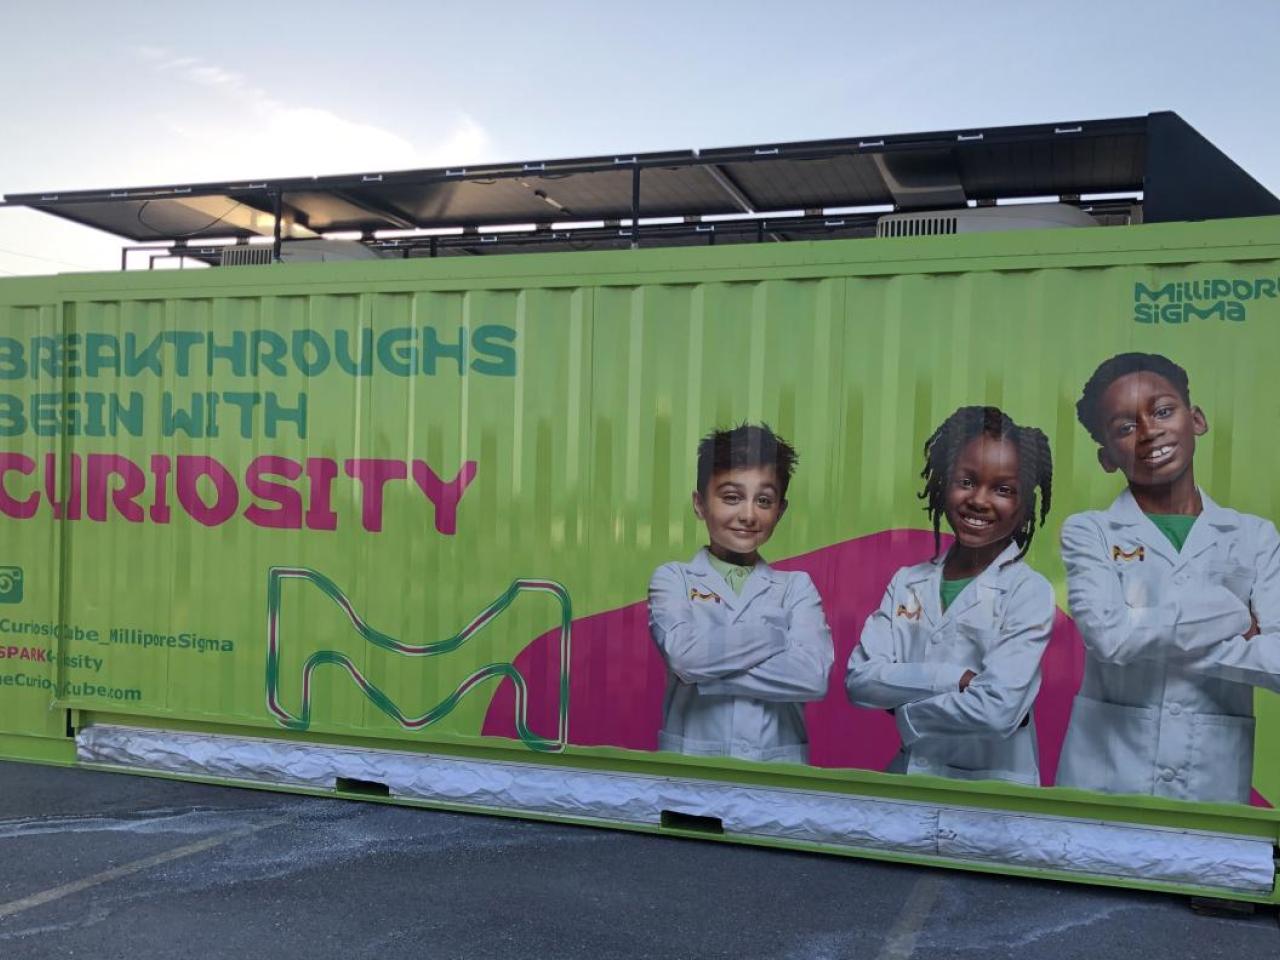 A green shipping container turned mobile science lab features three young scientists and text reading, "Breakthroughs Begin With Curiosity."